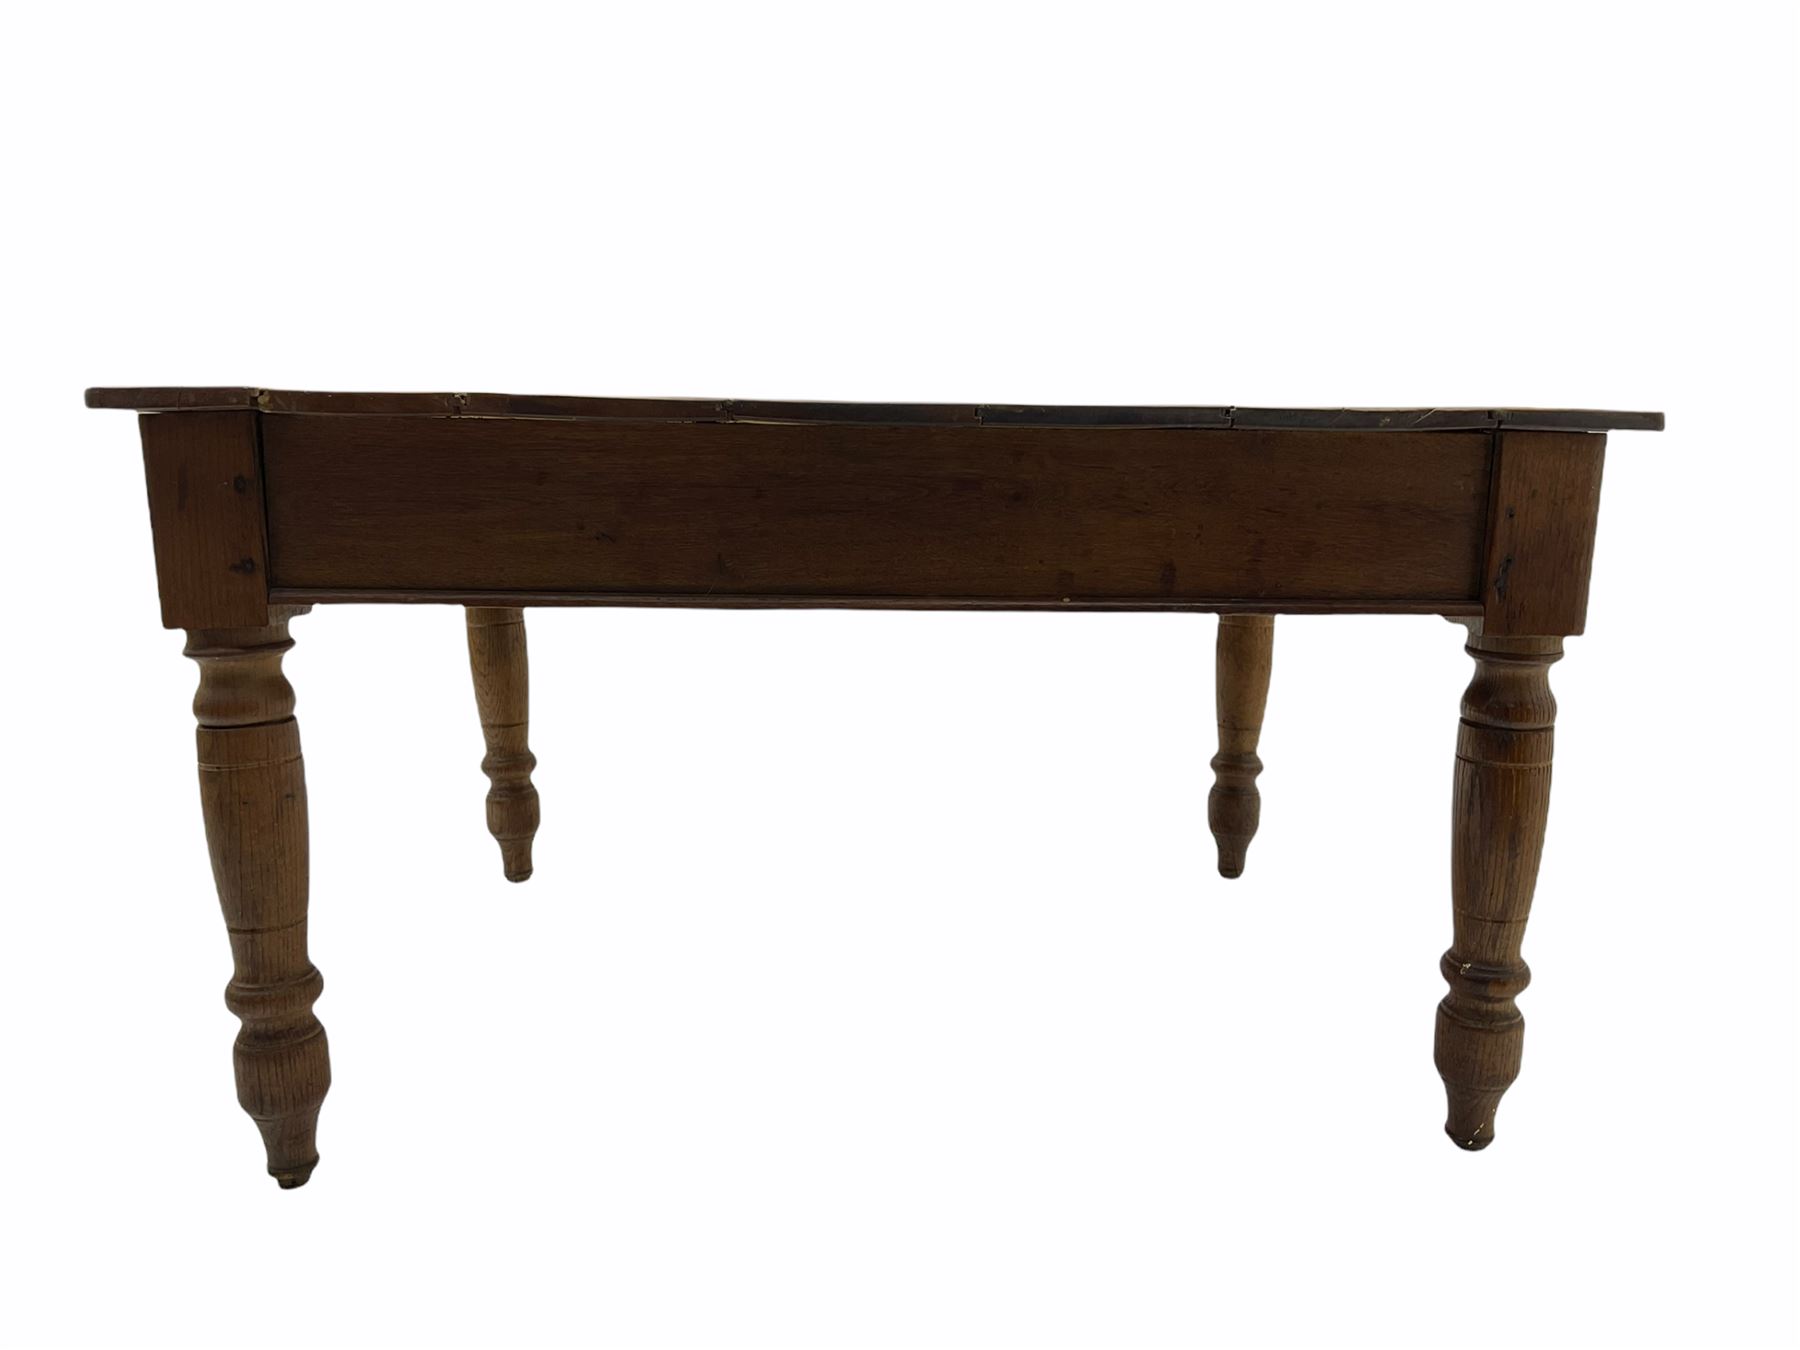 19th century oak and sycamore kitchen table - Image 2 of 8